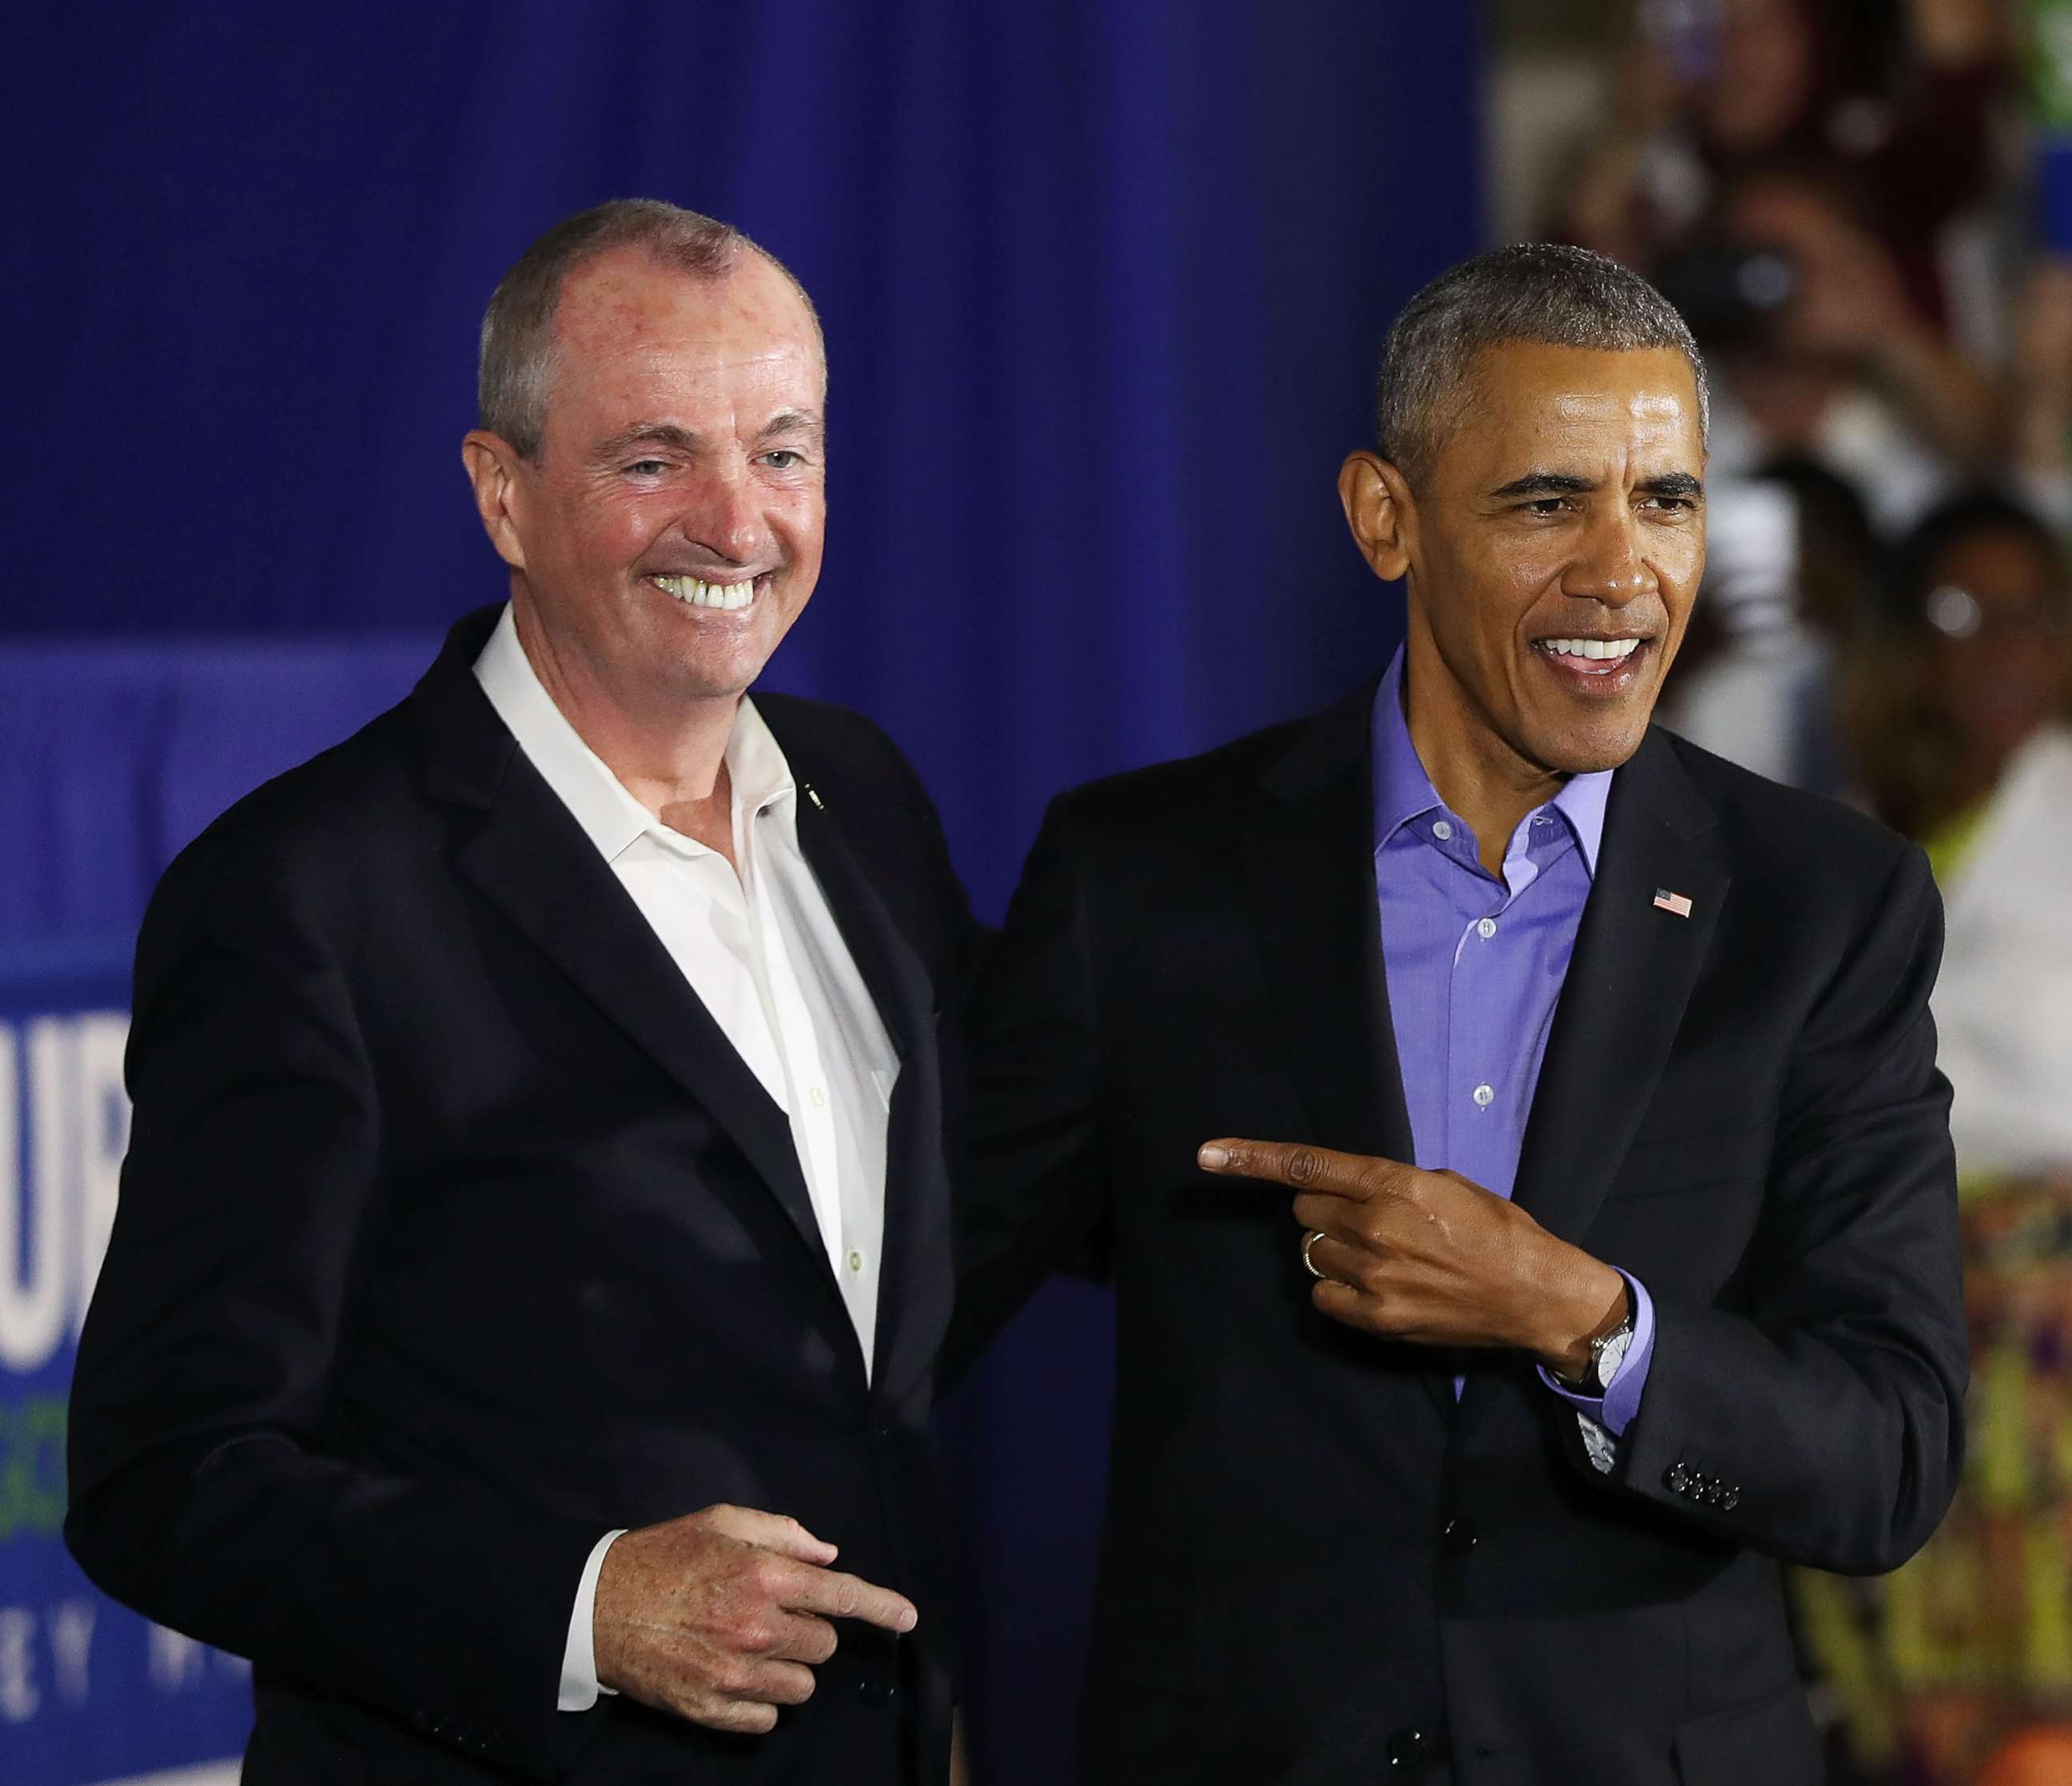 PHOTO: Former President Barack Obama campaigns with Democratic candidate for New Jersey Governor Phil Murphy, Oct. 19, 2017 in Newark, N.J. 